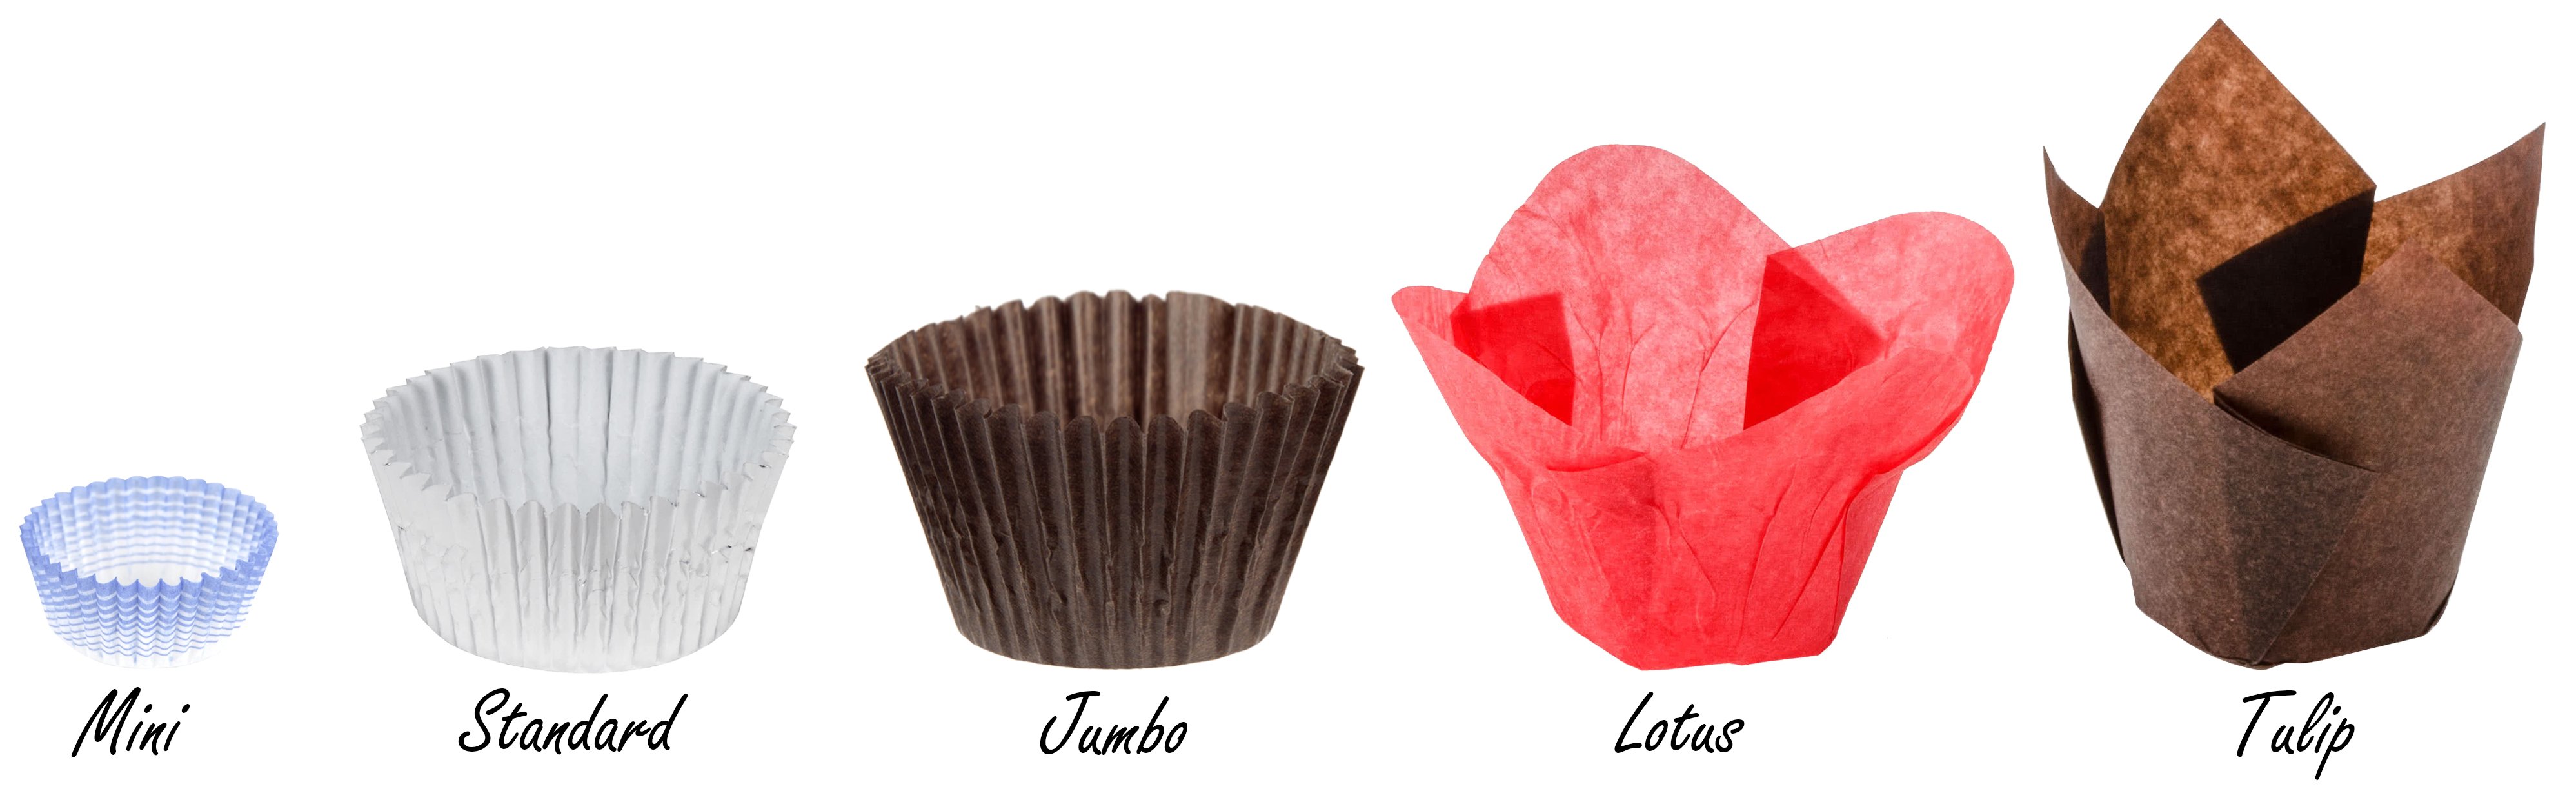 Baking cup sizes shown from mini to tulip